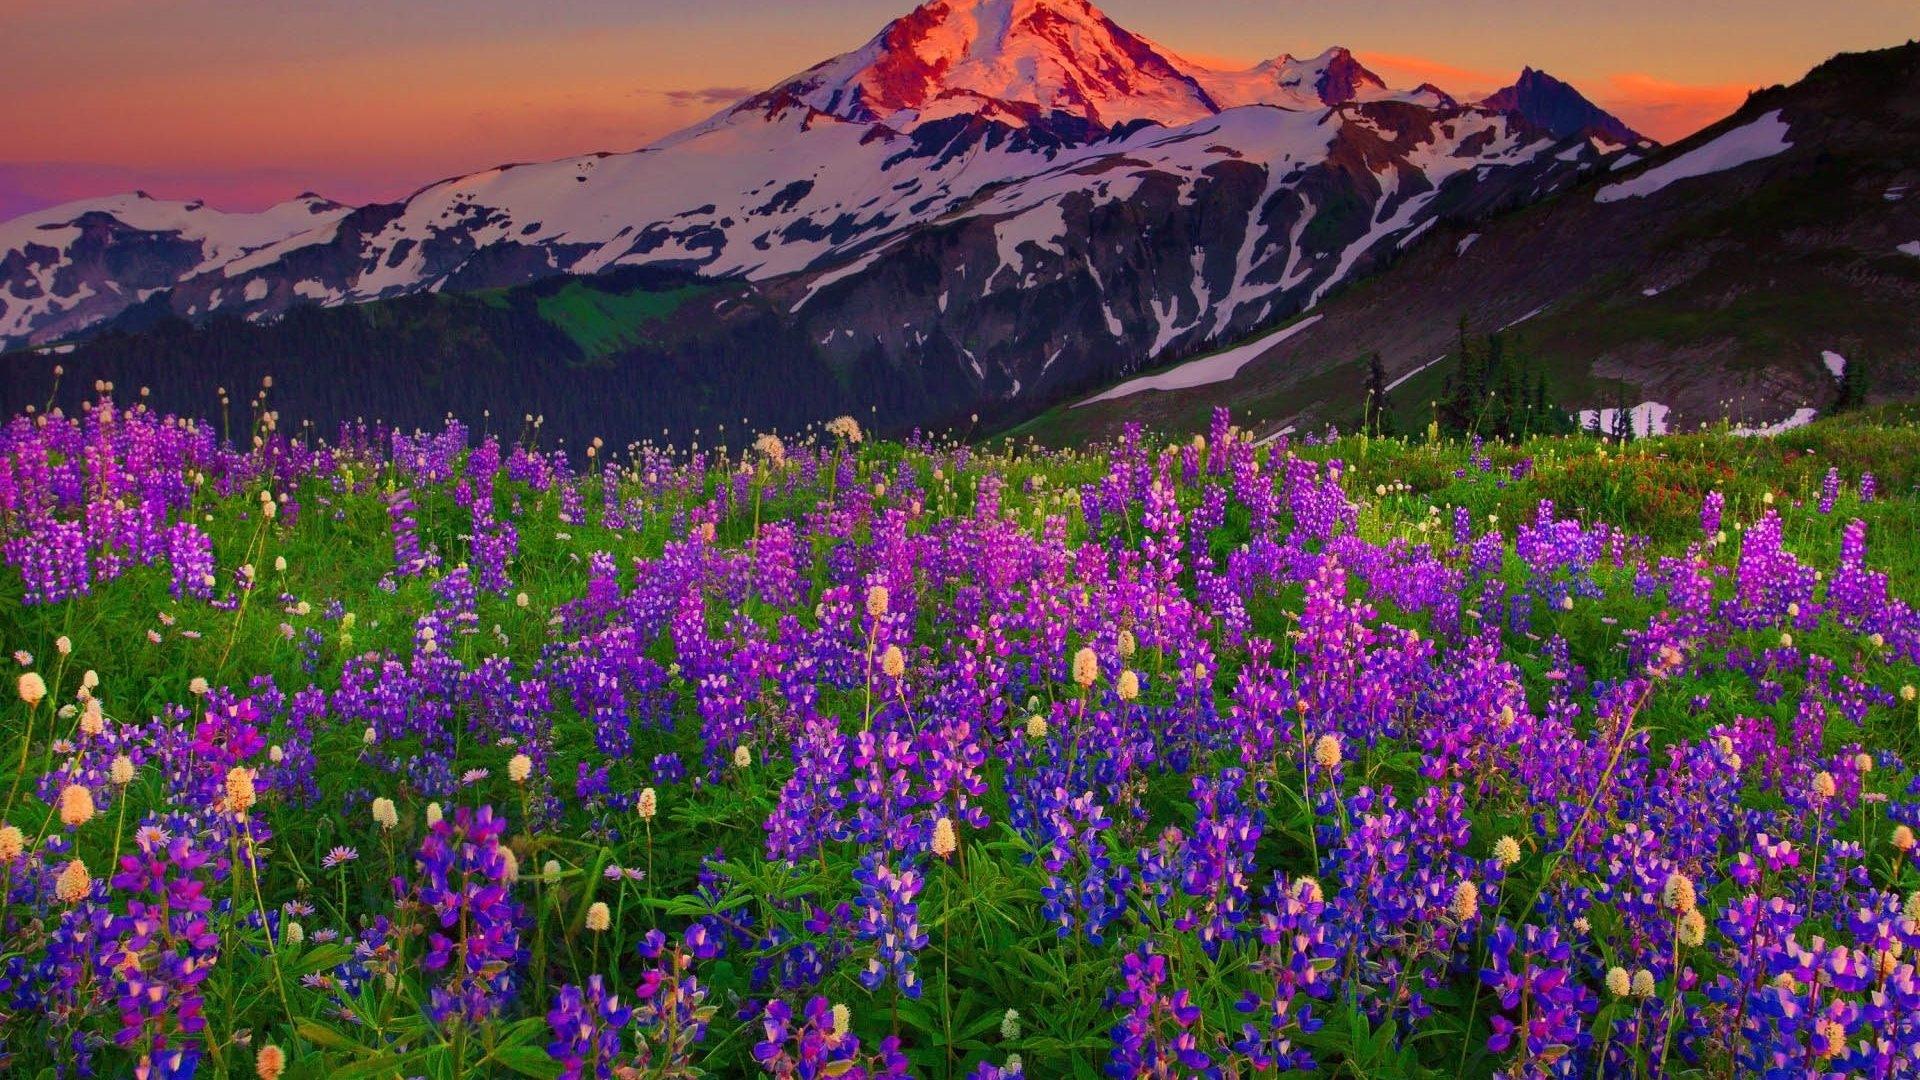 Wildflowers In The Mountains - HD Wallpaper 